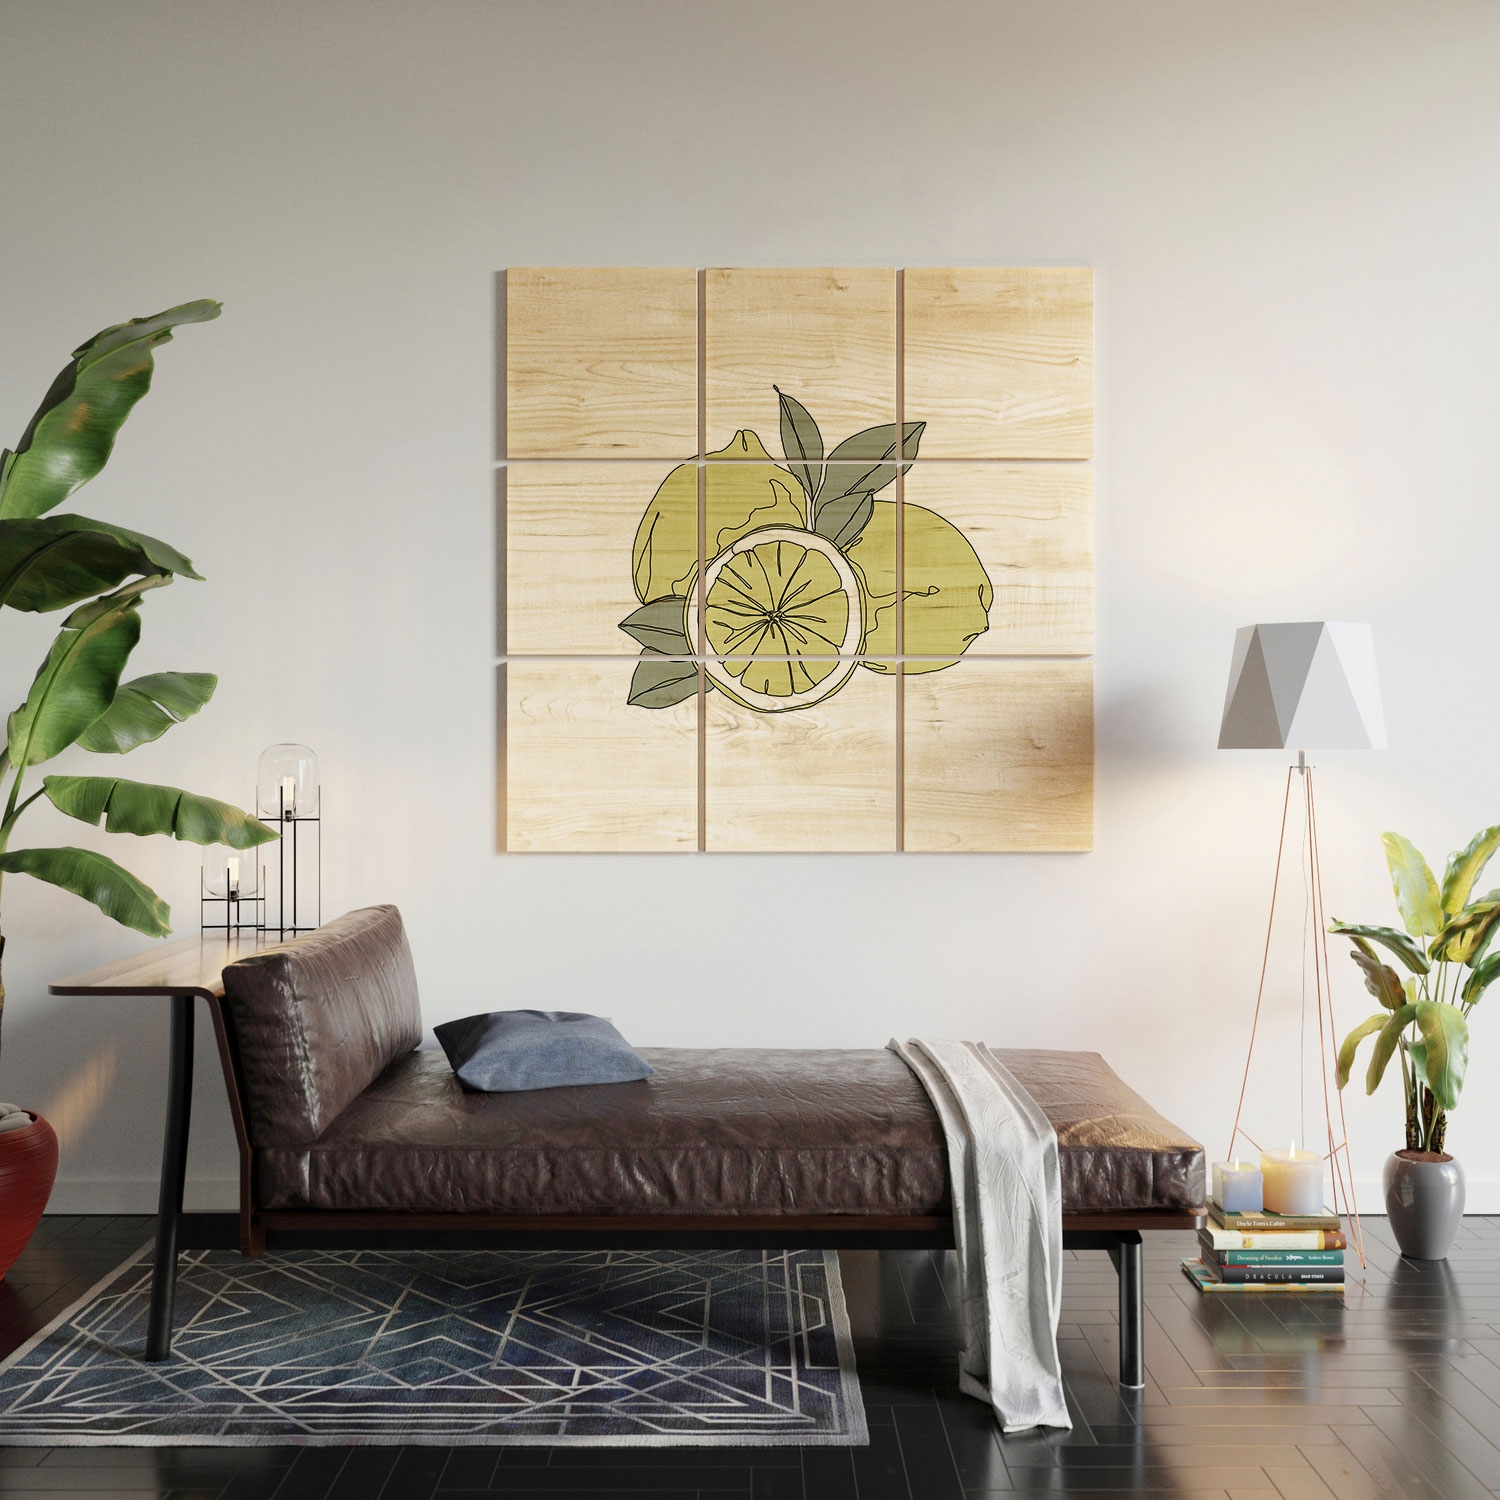 Lemons Artwork by The Colour Study - Wood Wall Mural3' X 3' (Nine 12" Wood Squares) - Image 1